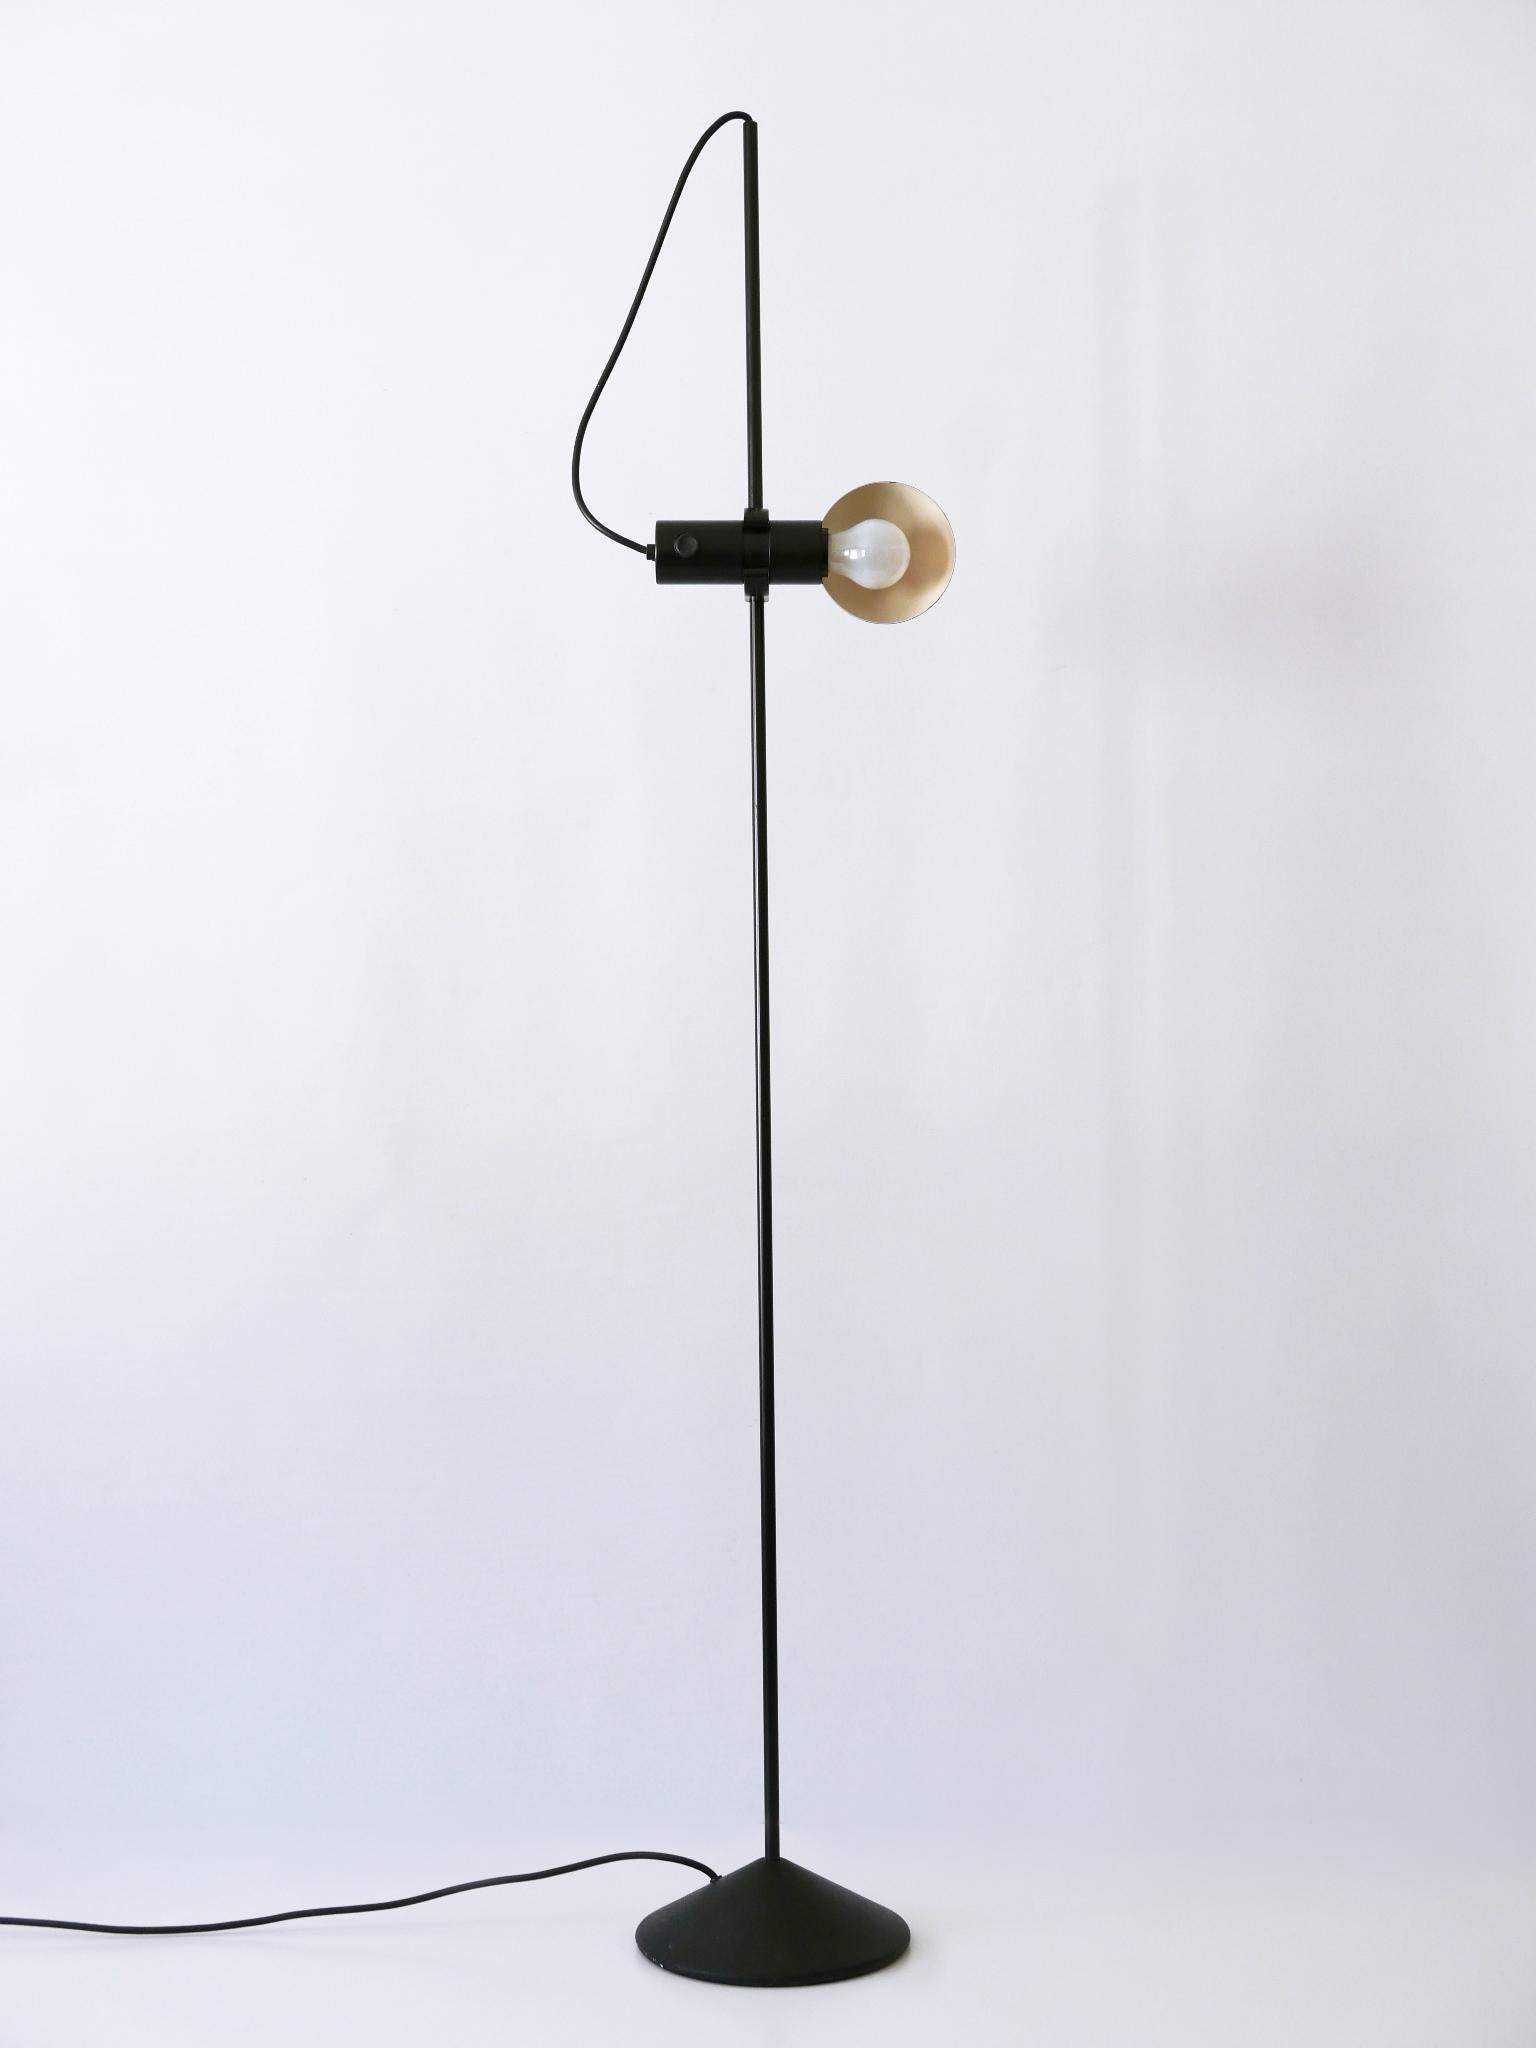 Rare Floor Lamp or Reading Light by Barbieri e Marianelli for Tronconi 1970s In Good Condition For Sale In Munich, DE